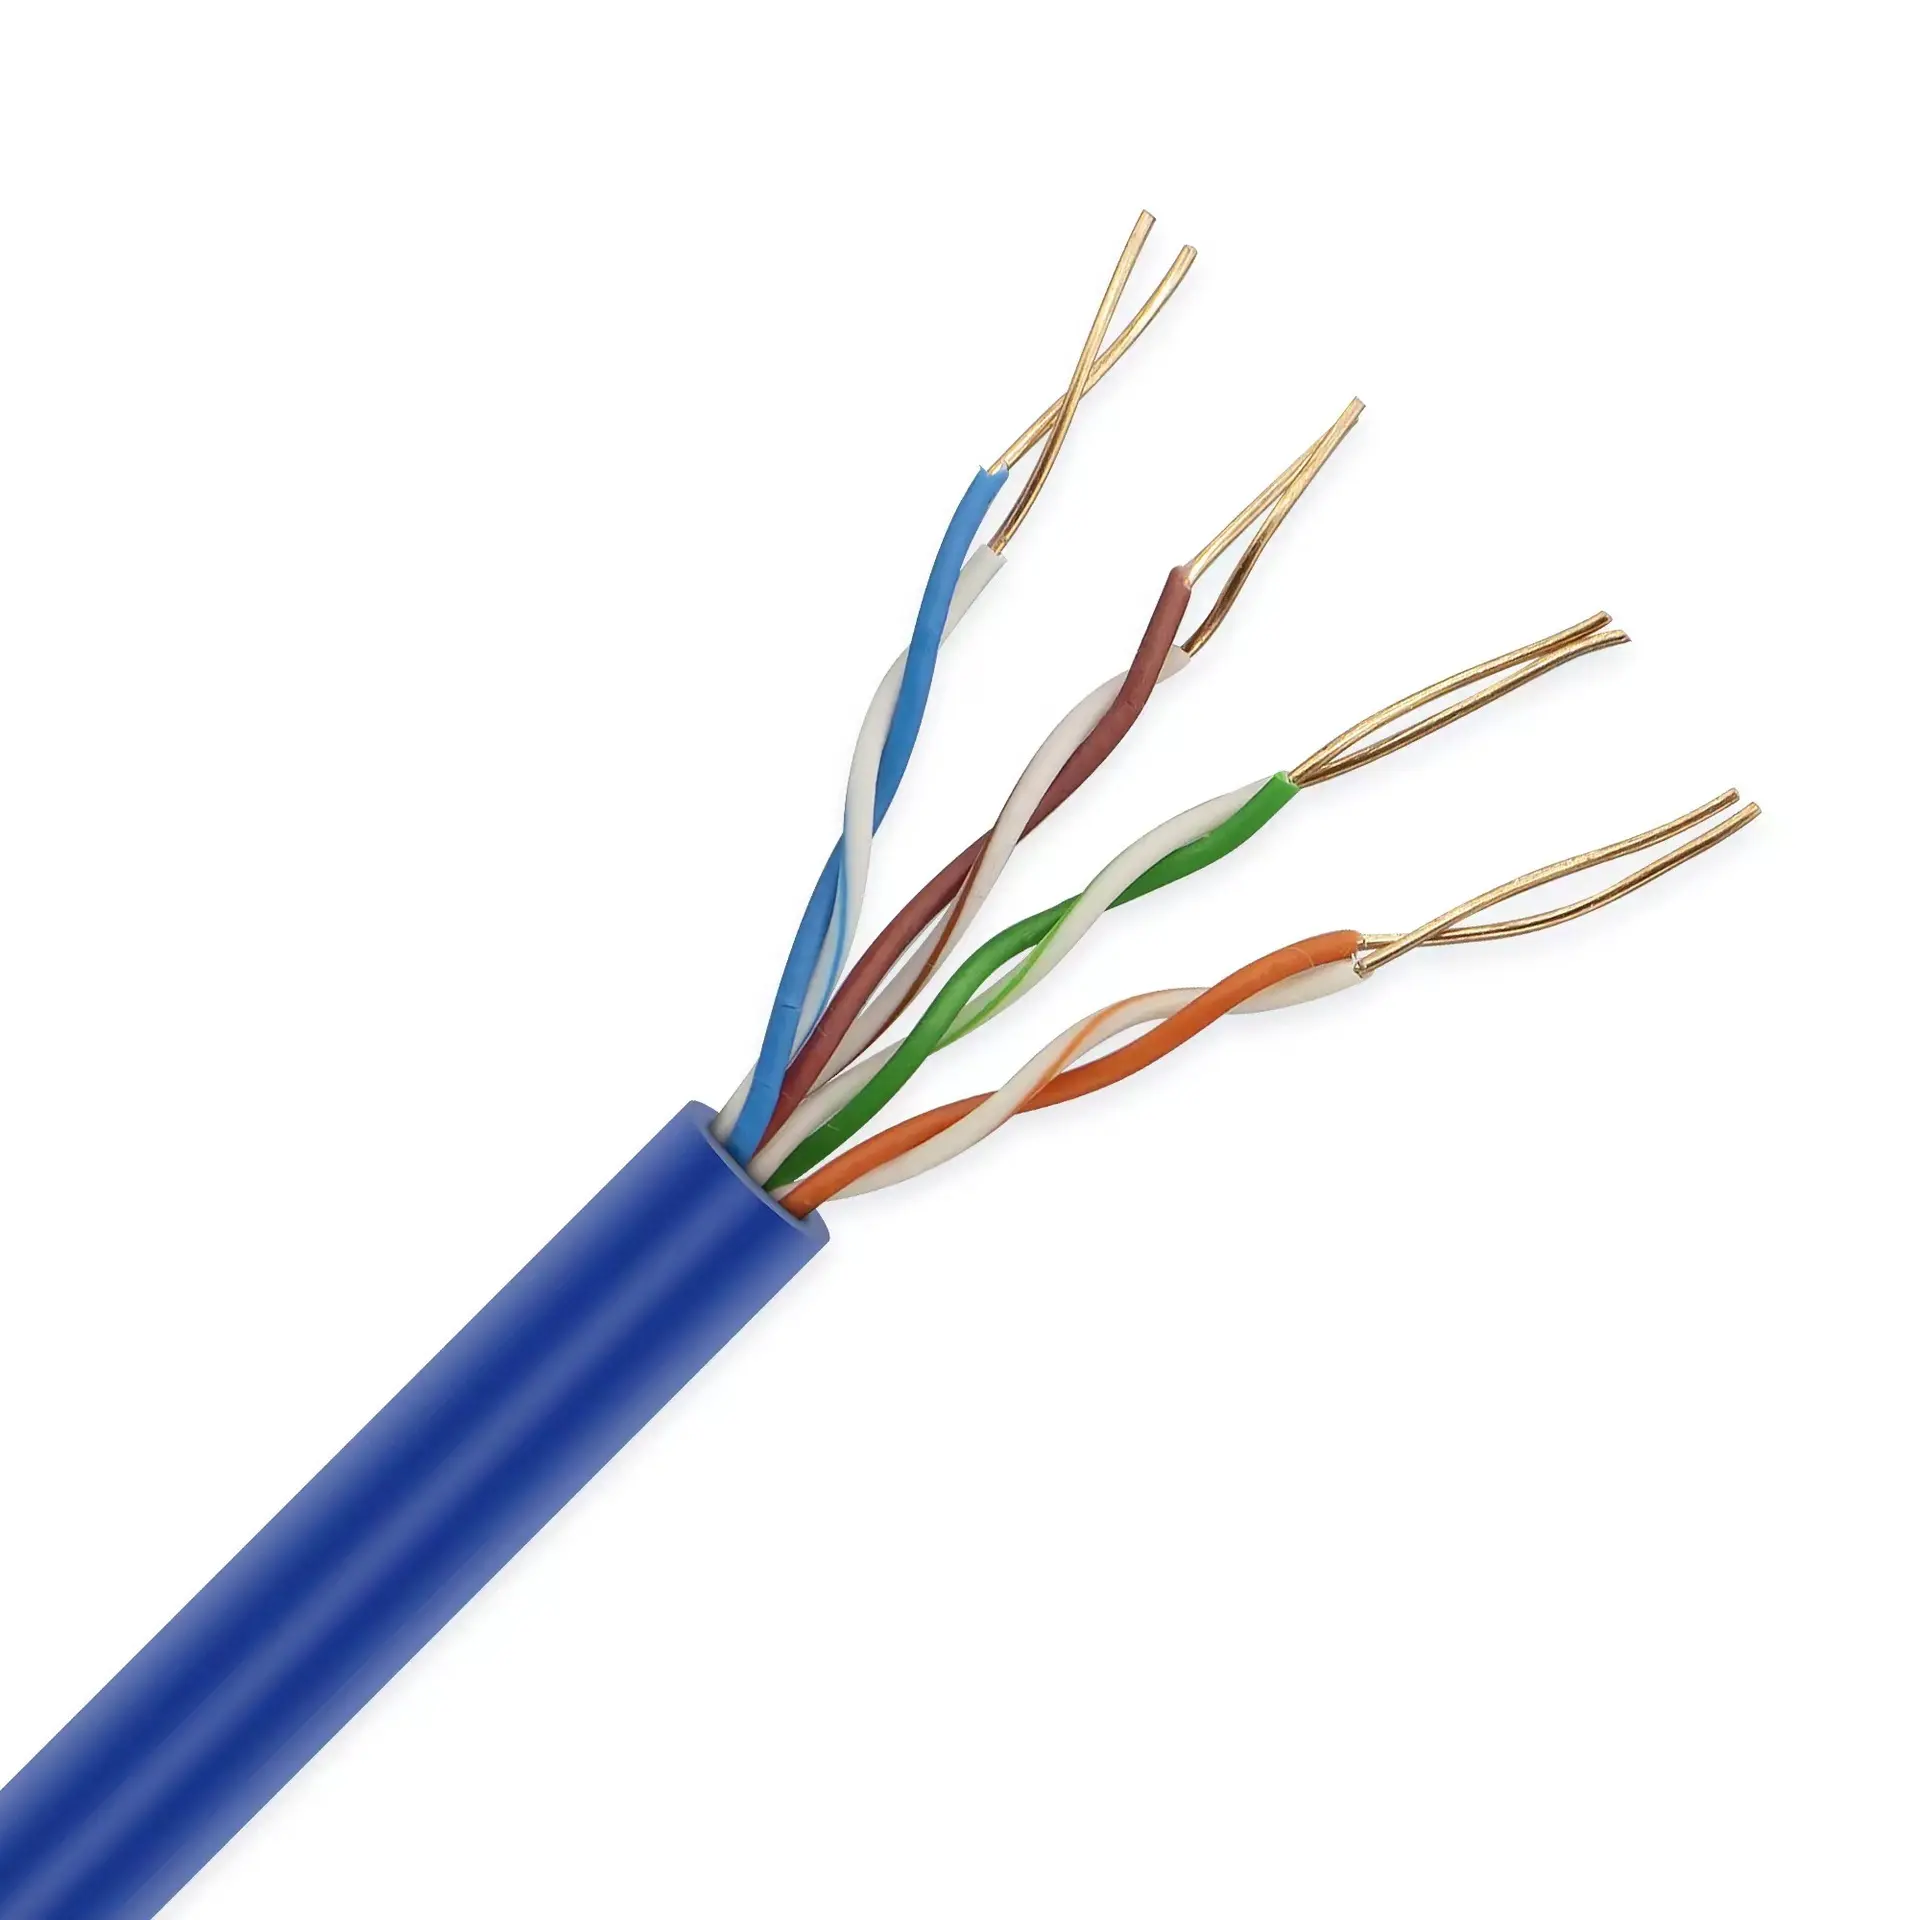 Ying xin 100Mhz CAT5E Ethernet Cable 4 Pairs Communication UTP FTP SFTP Network Cable 1000ft 305m 24AWG